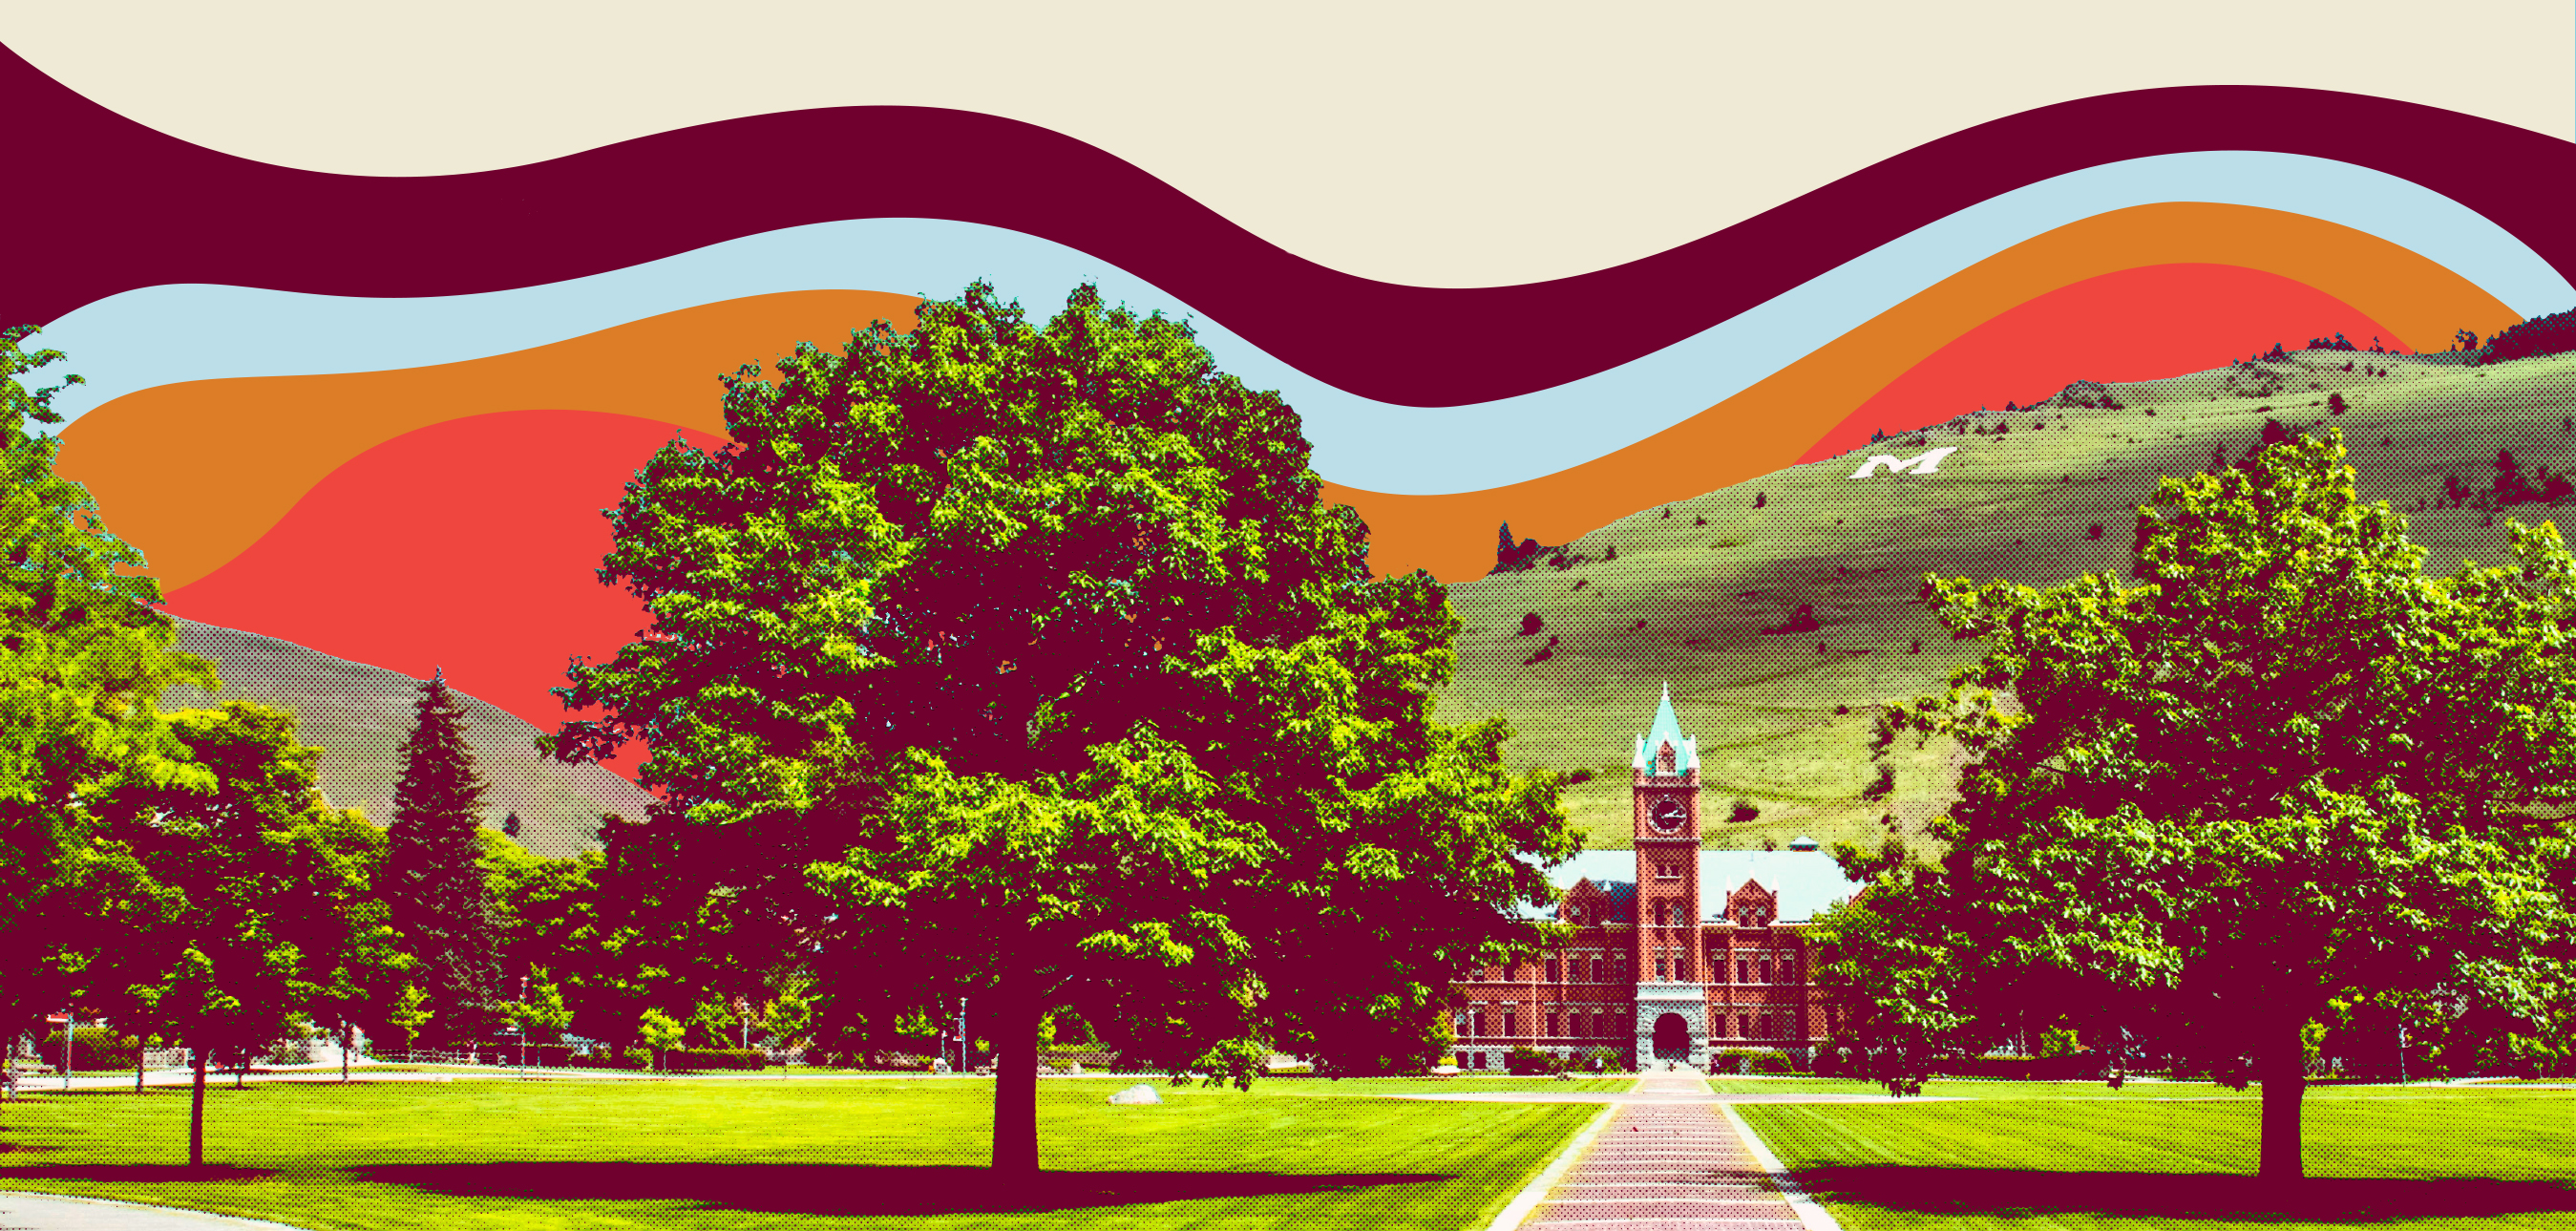 University of Montana logo and picture of Main Hall